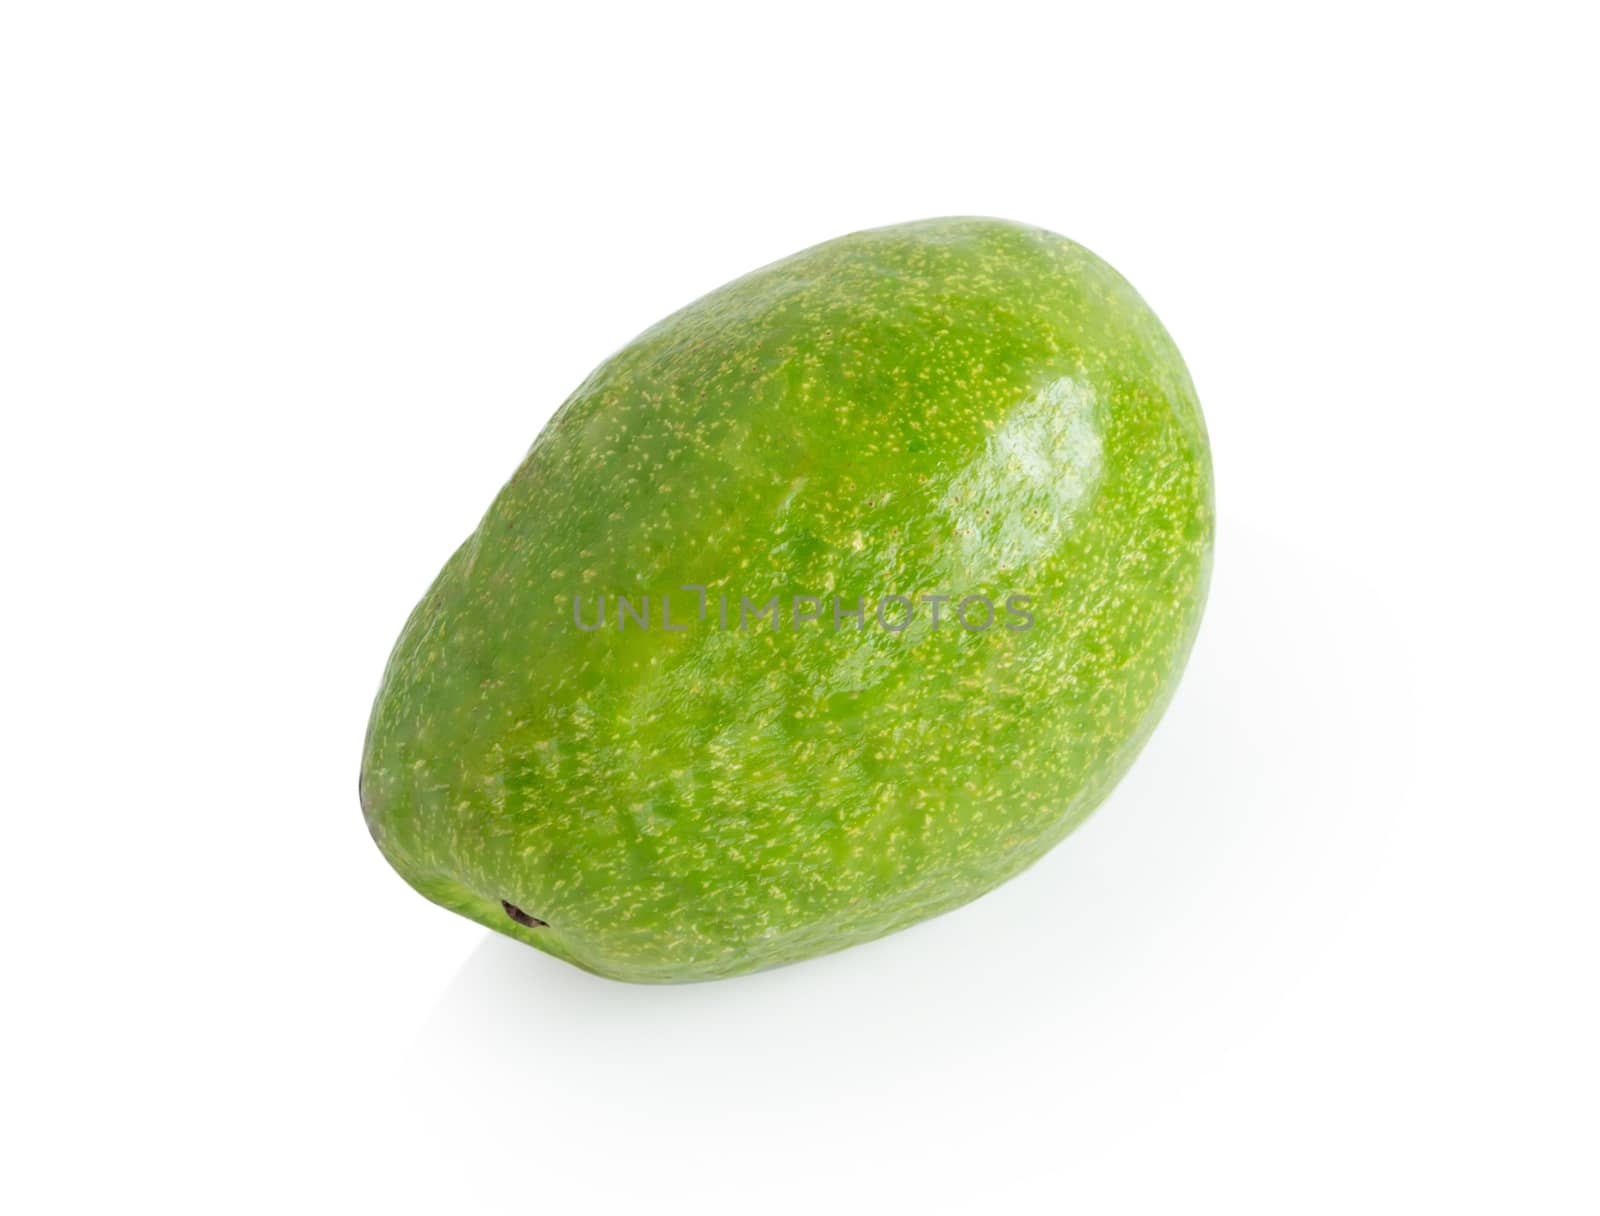 Closeup avocado ripe fruit isolated on white background with cop by pt.pongsak@gmail.com